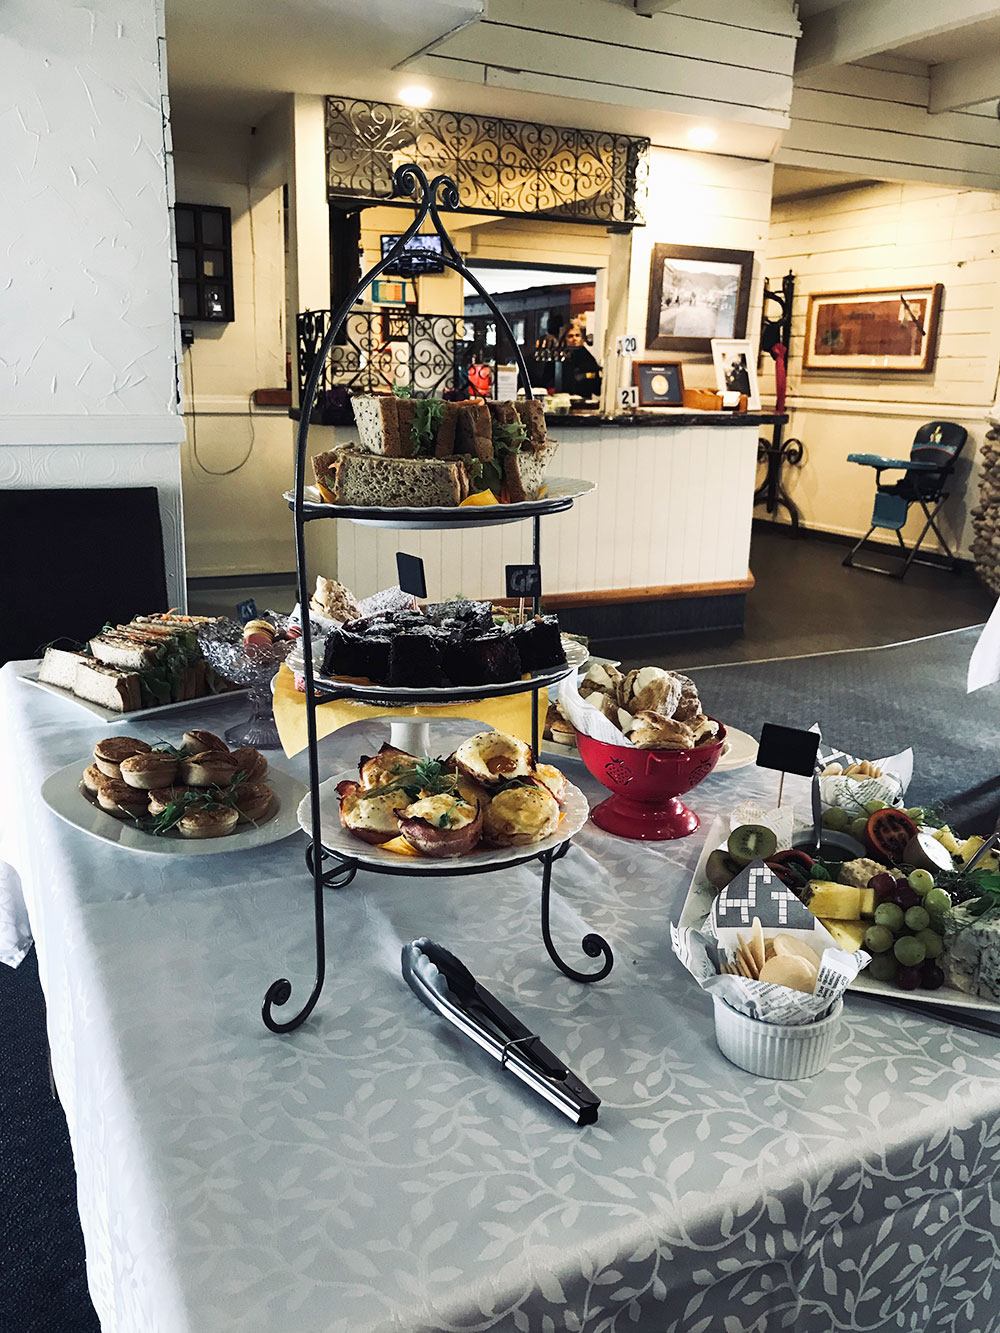 Afternoon tea tables at Dawsons Hotel Reefton